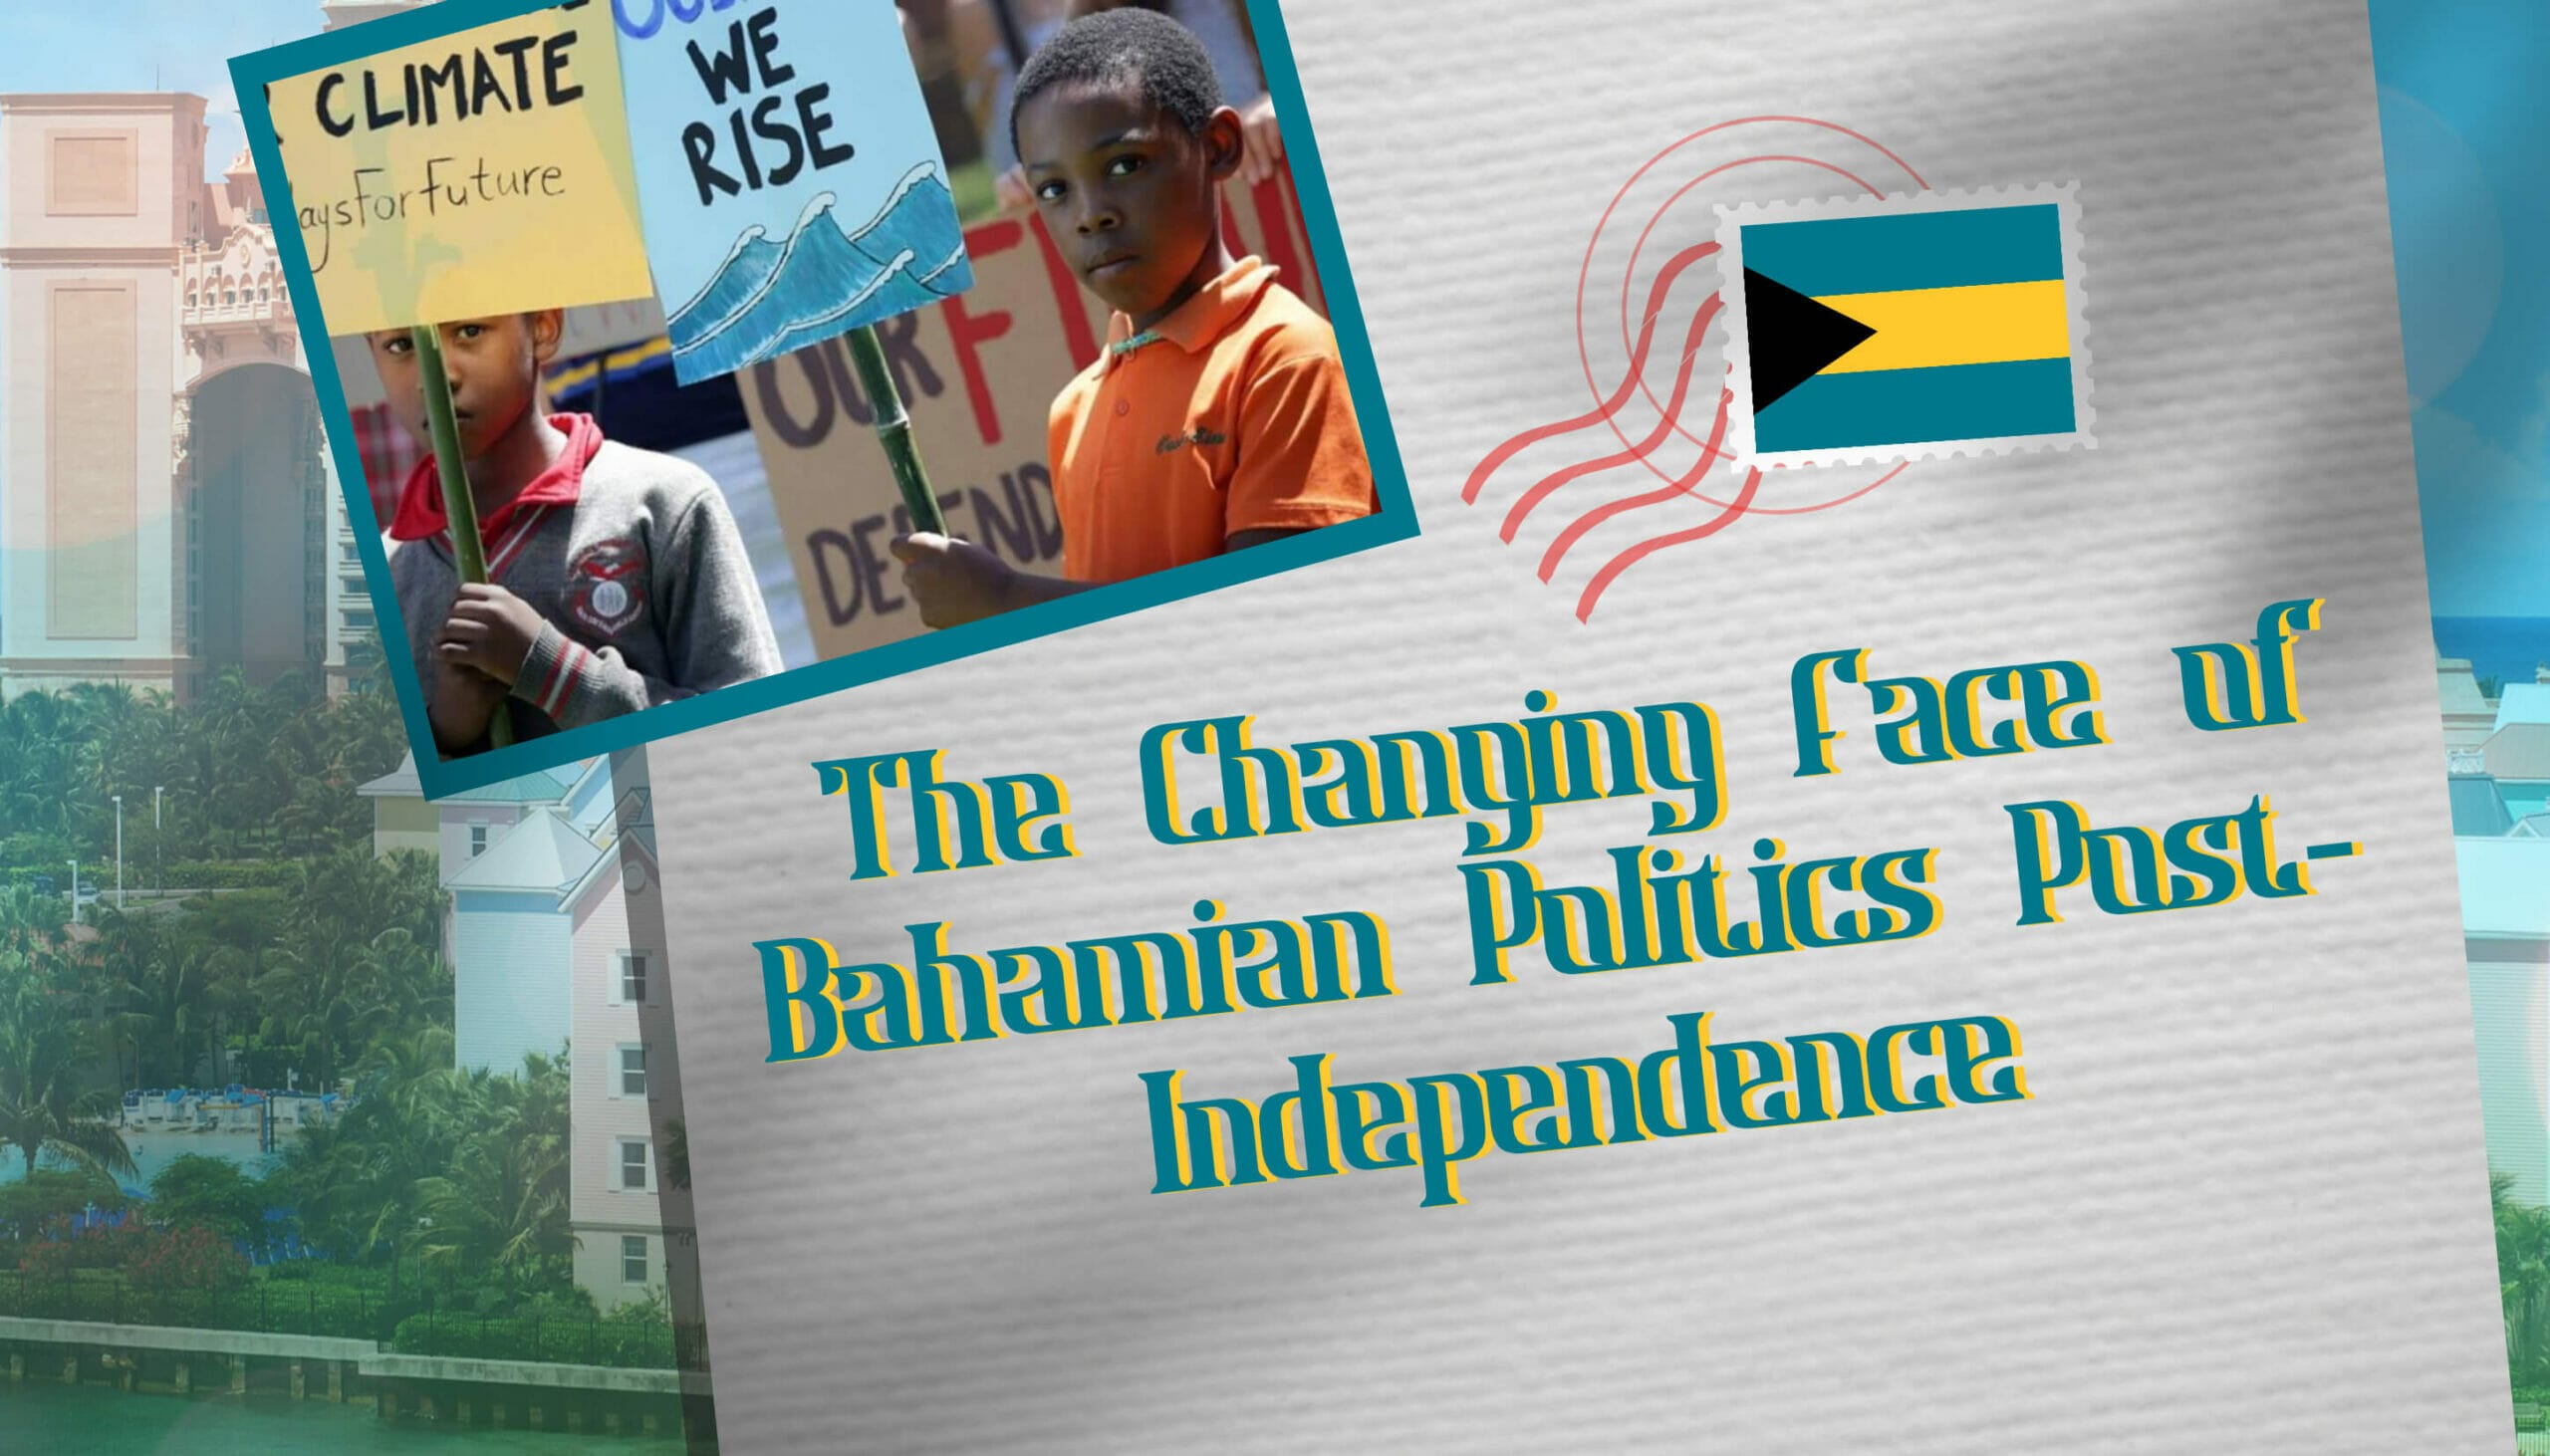 The Changing Face of Bahamian Politics Post-Independence